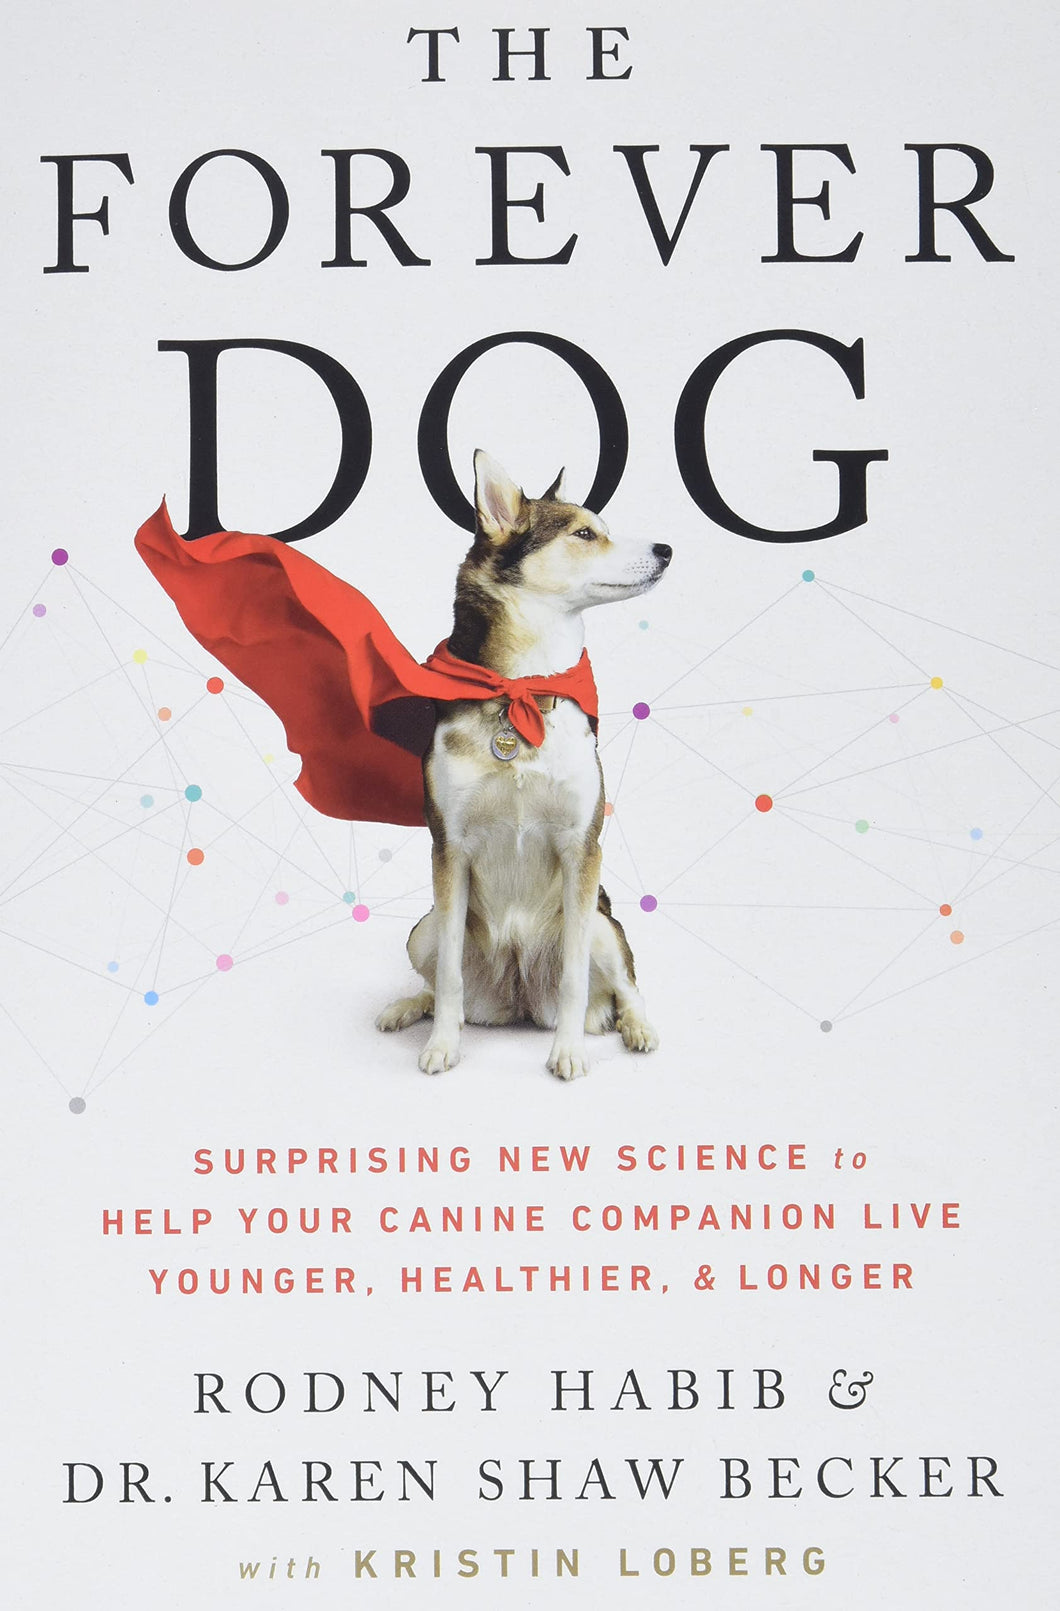 The Forever Dog: Surprising New Science To Help Your Canine Companion Live Younger, Healthier, & Longer [Rodney Habib & Dr. Karen Shaw Becker]